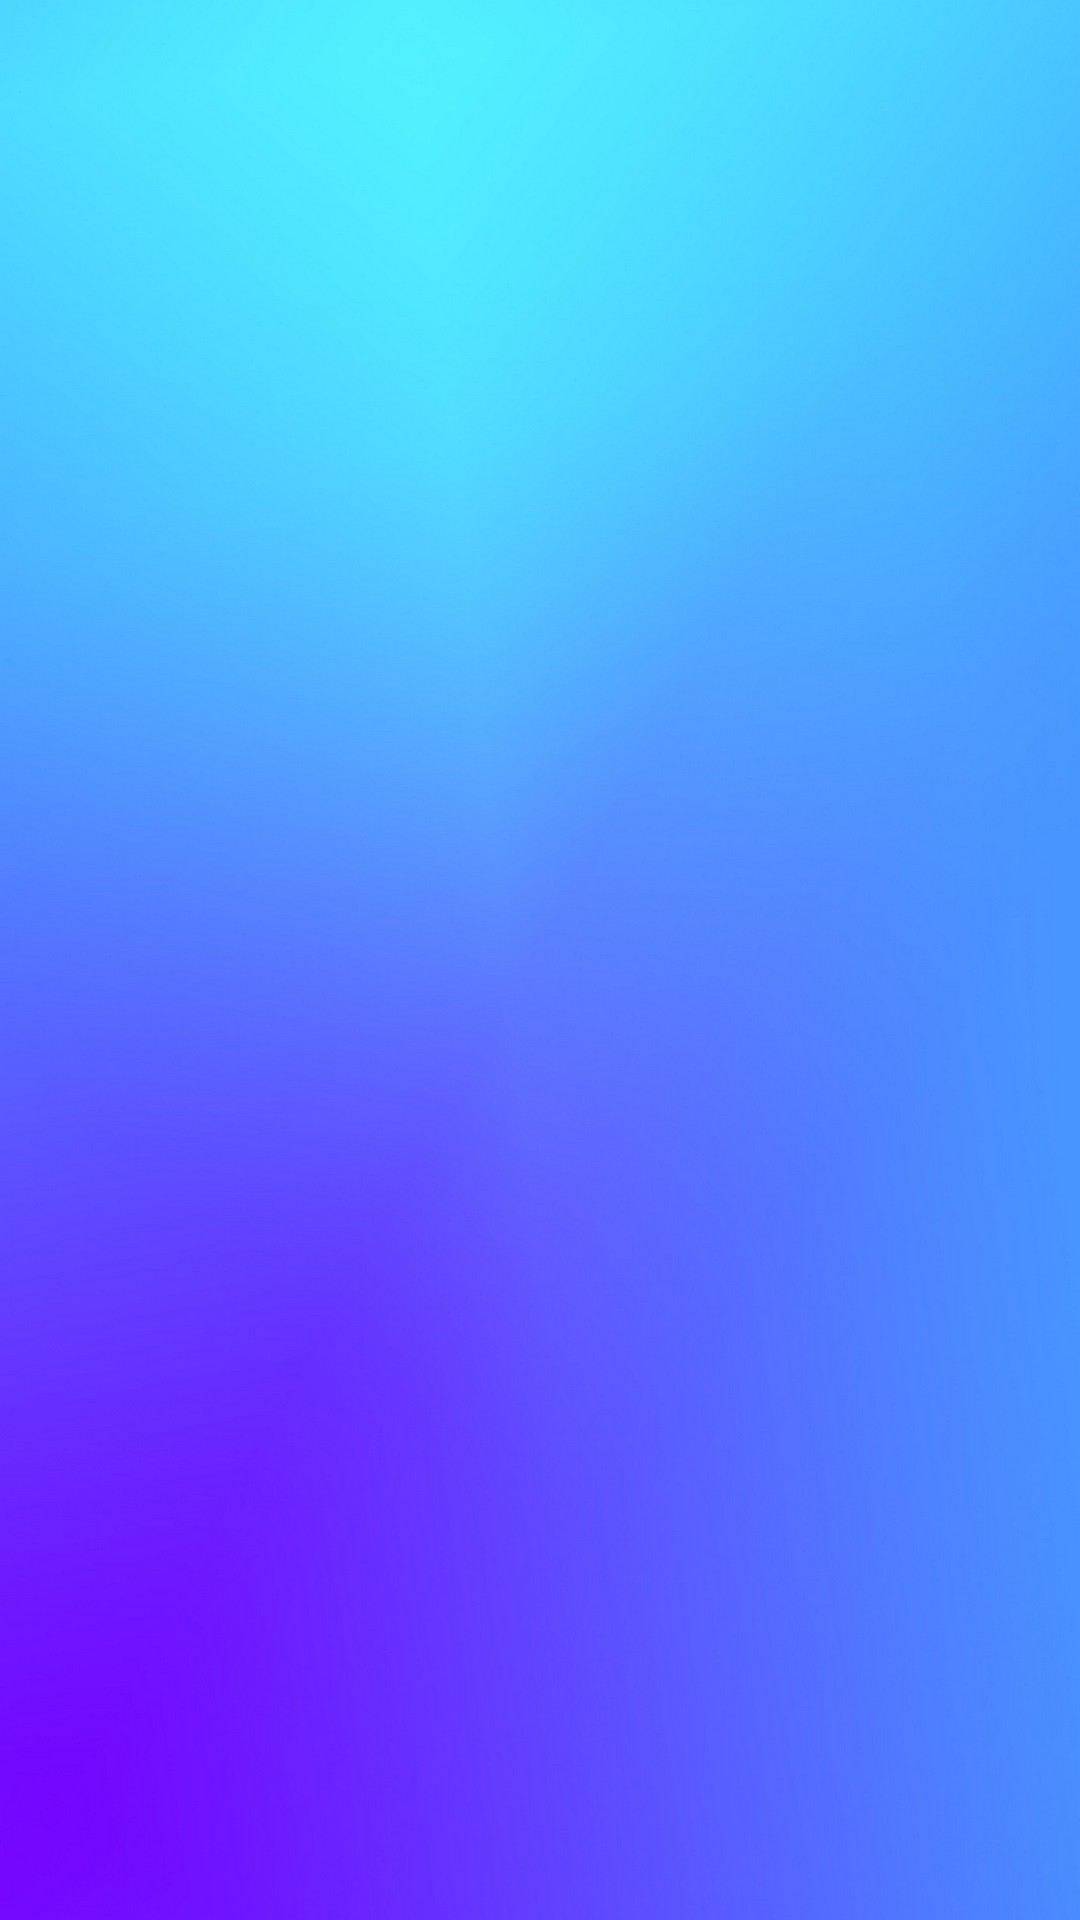 Wallpapers Computer Gradient With high-resolution 1080X1920 pixel. You can use this wallpaper for your Desktop Computer Backgrounds, Mac Wallpapers, Android Lock screen or iPhone Screensavers and another smartphone device